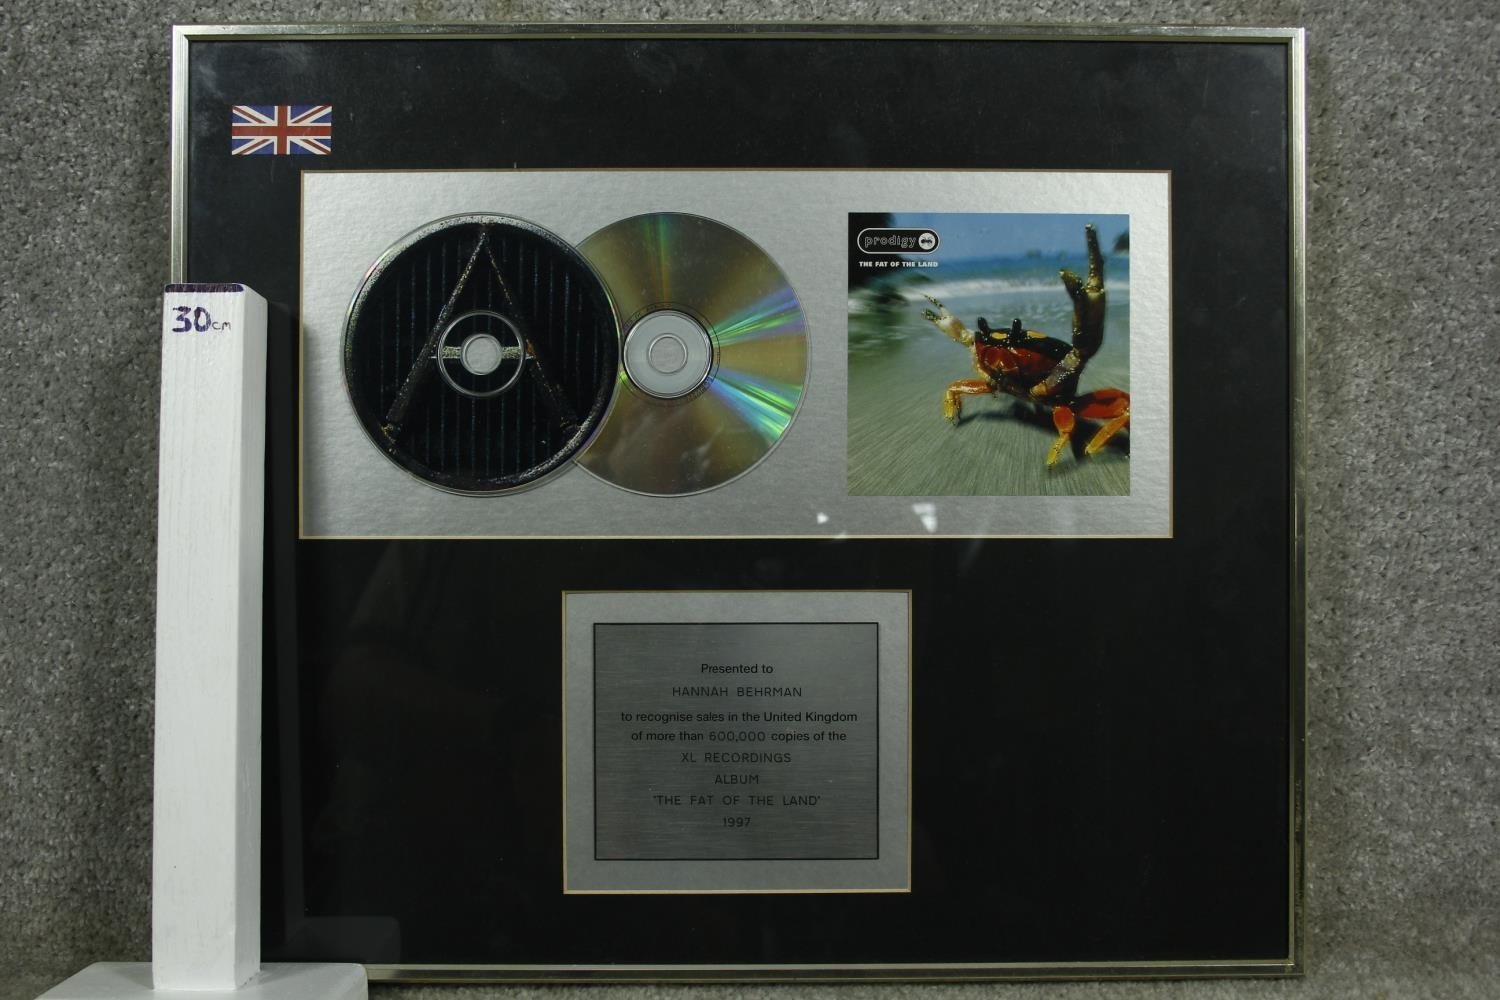 A framed producers presentation for sales of 600,000 copies of Fat of the Land by The Prodigy. H. - Image 5 of 5